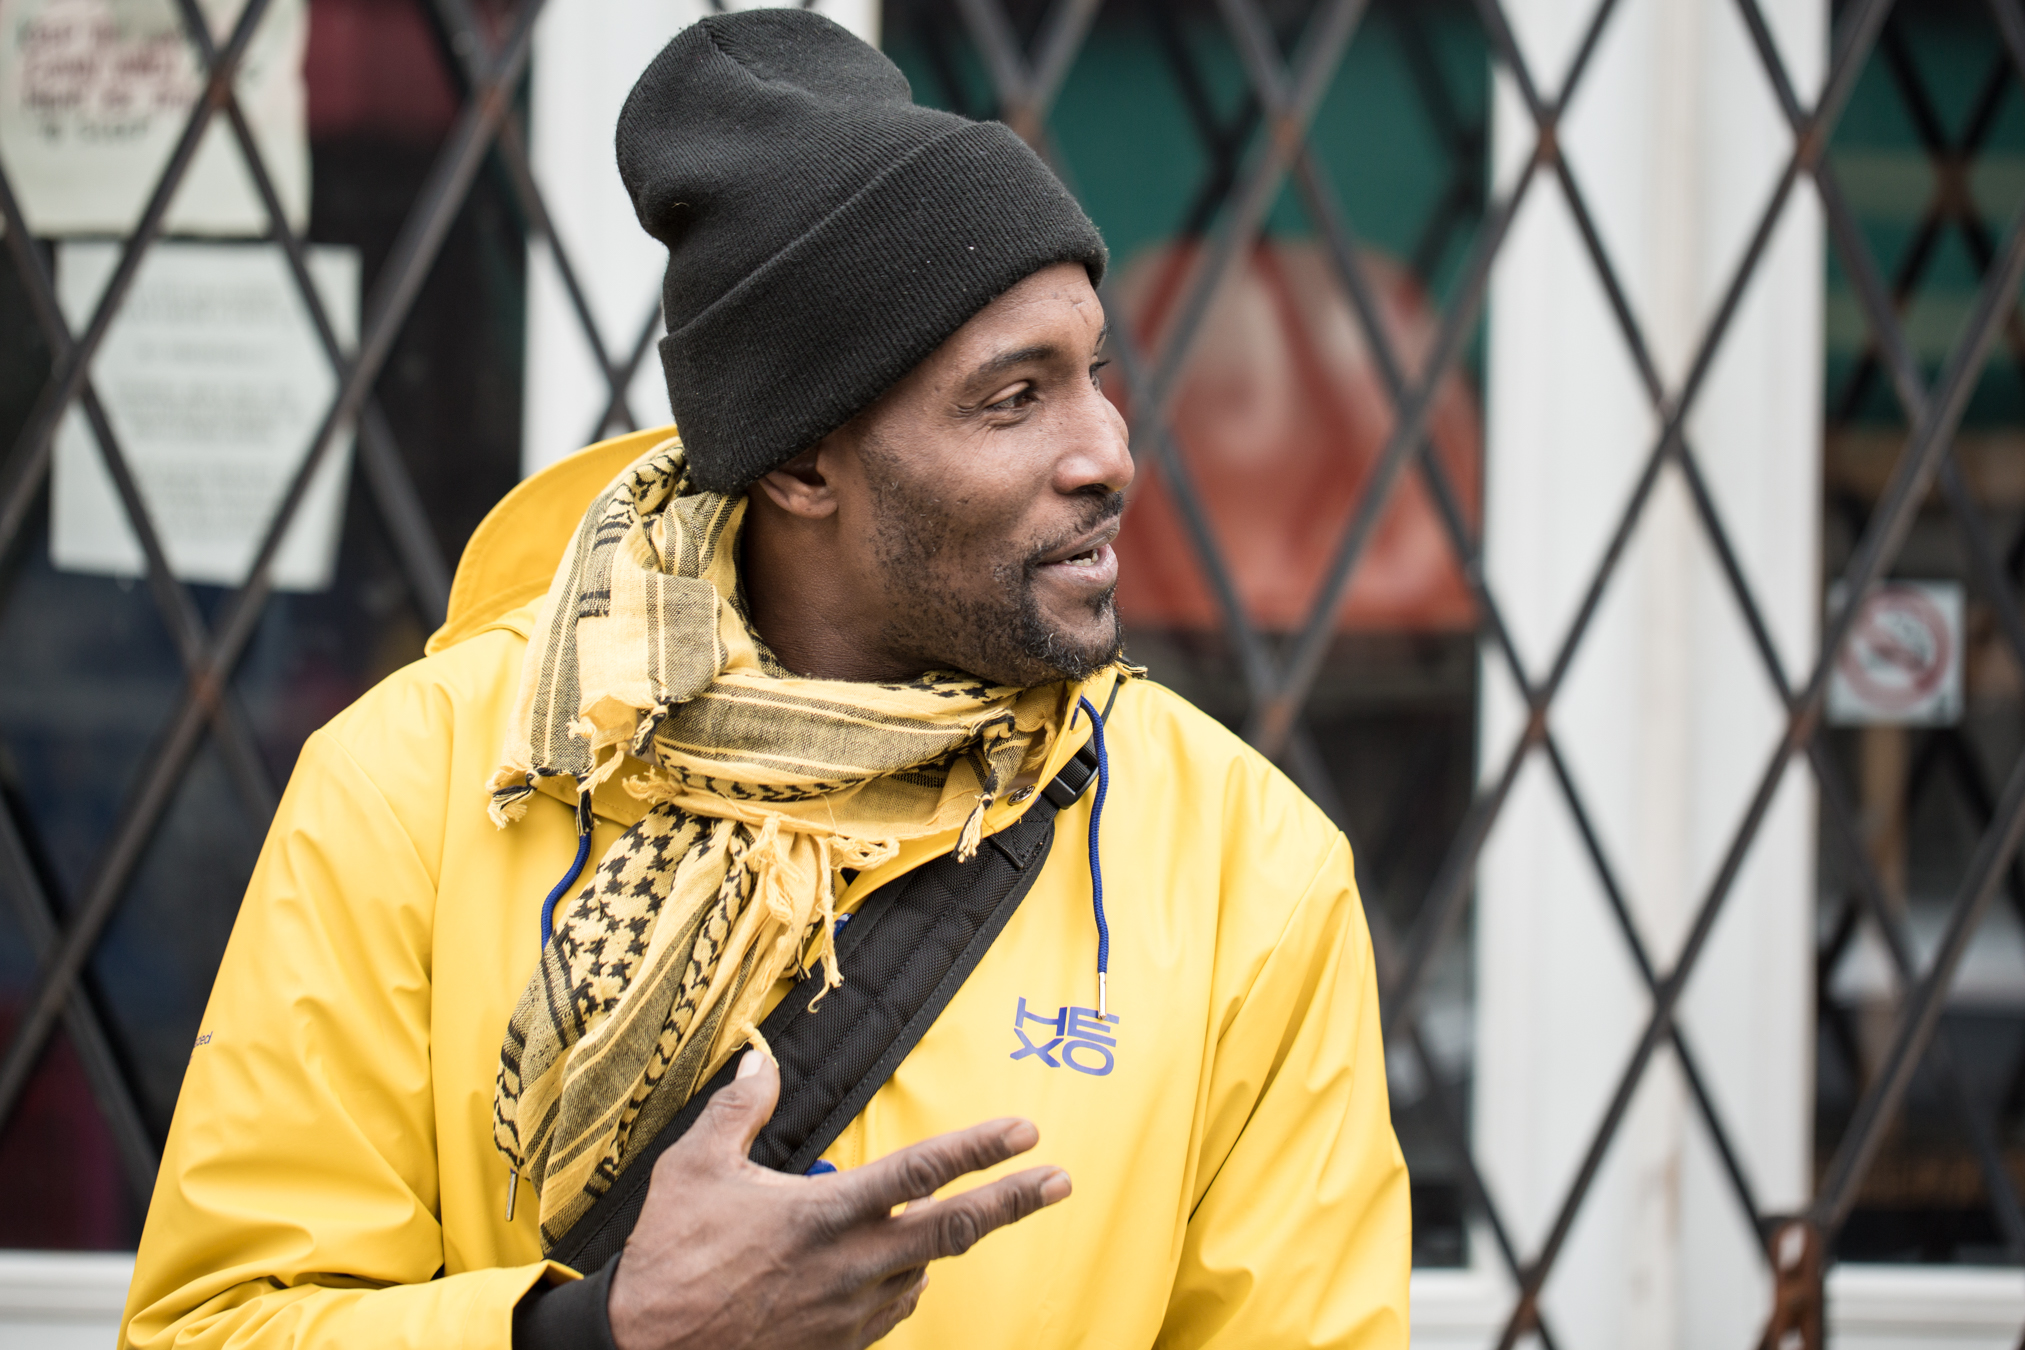 Melodic Yoza has to be one of the hardest working people in YYZ - look him up on all forms of social media and wherever music can be streamed, i really dig his yellow on yellow here - Baldwin Street - Kensington Market - Toronto, Ontario